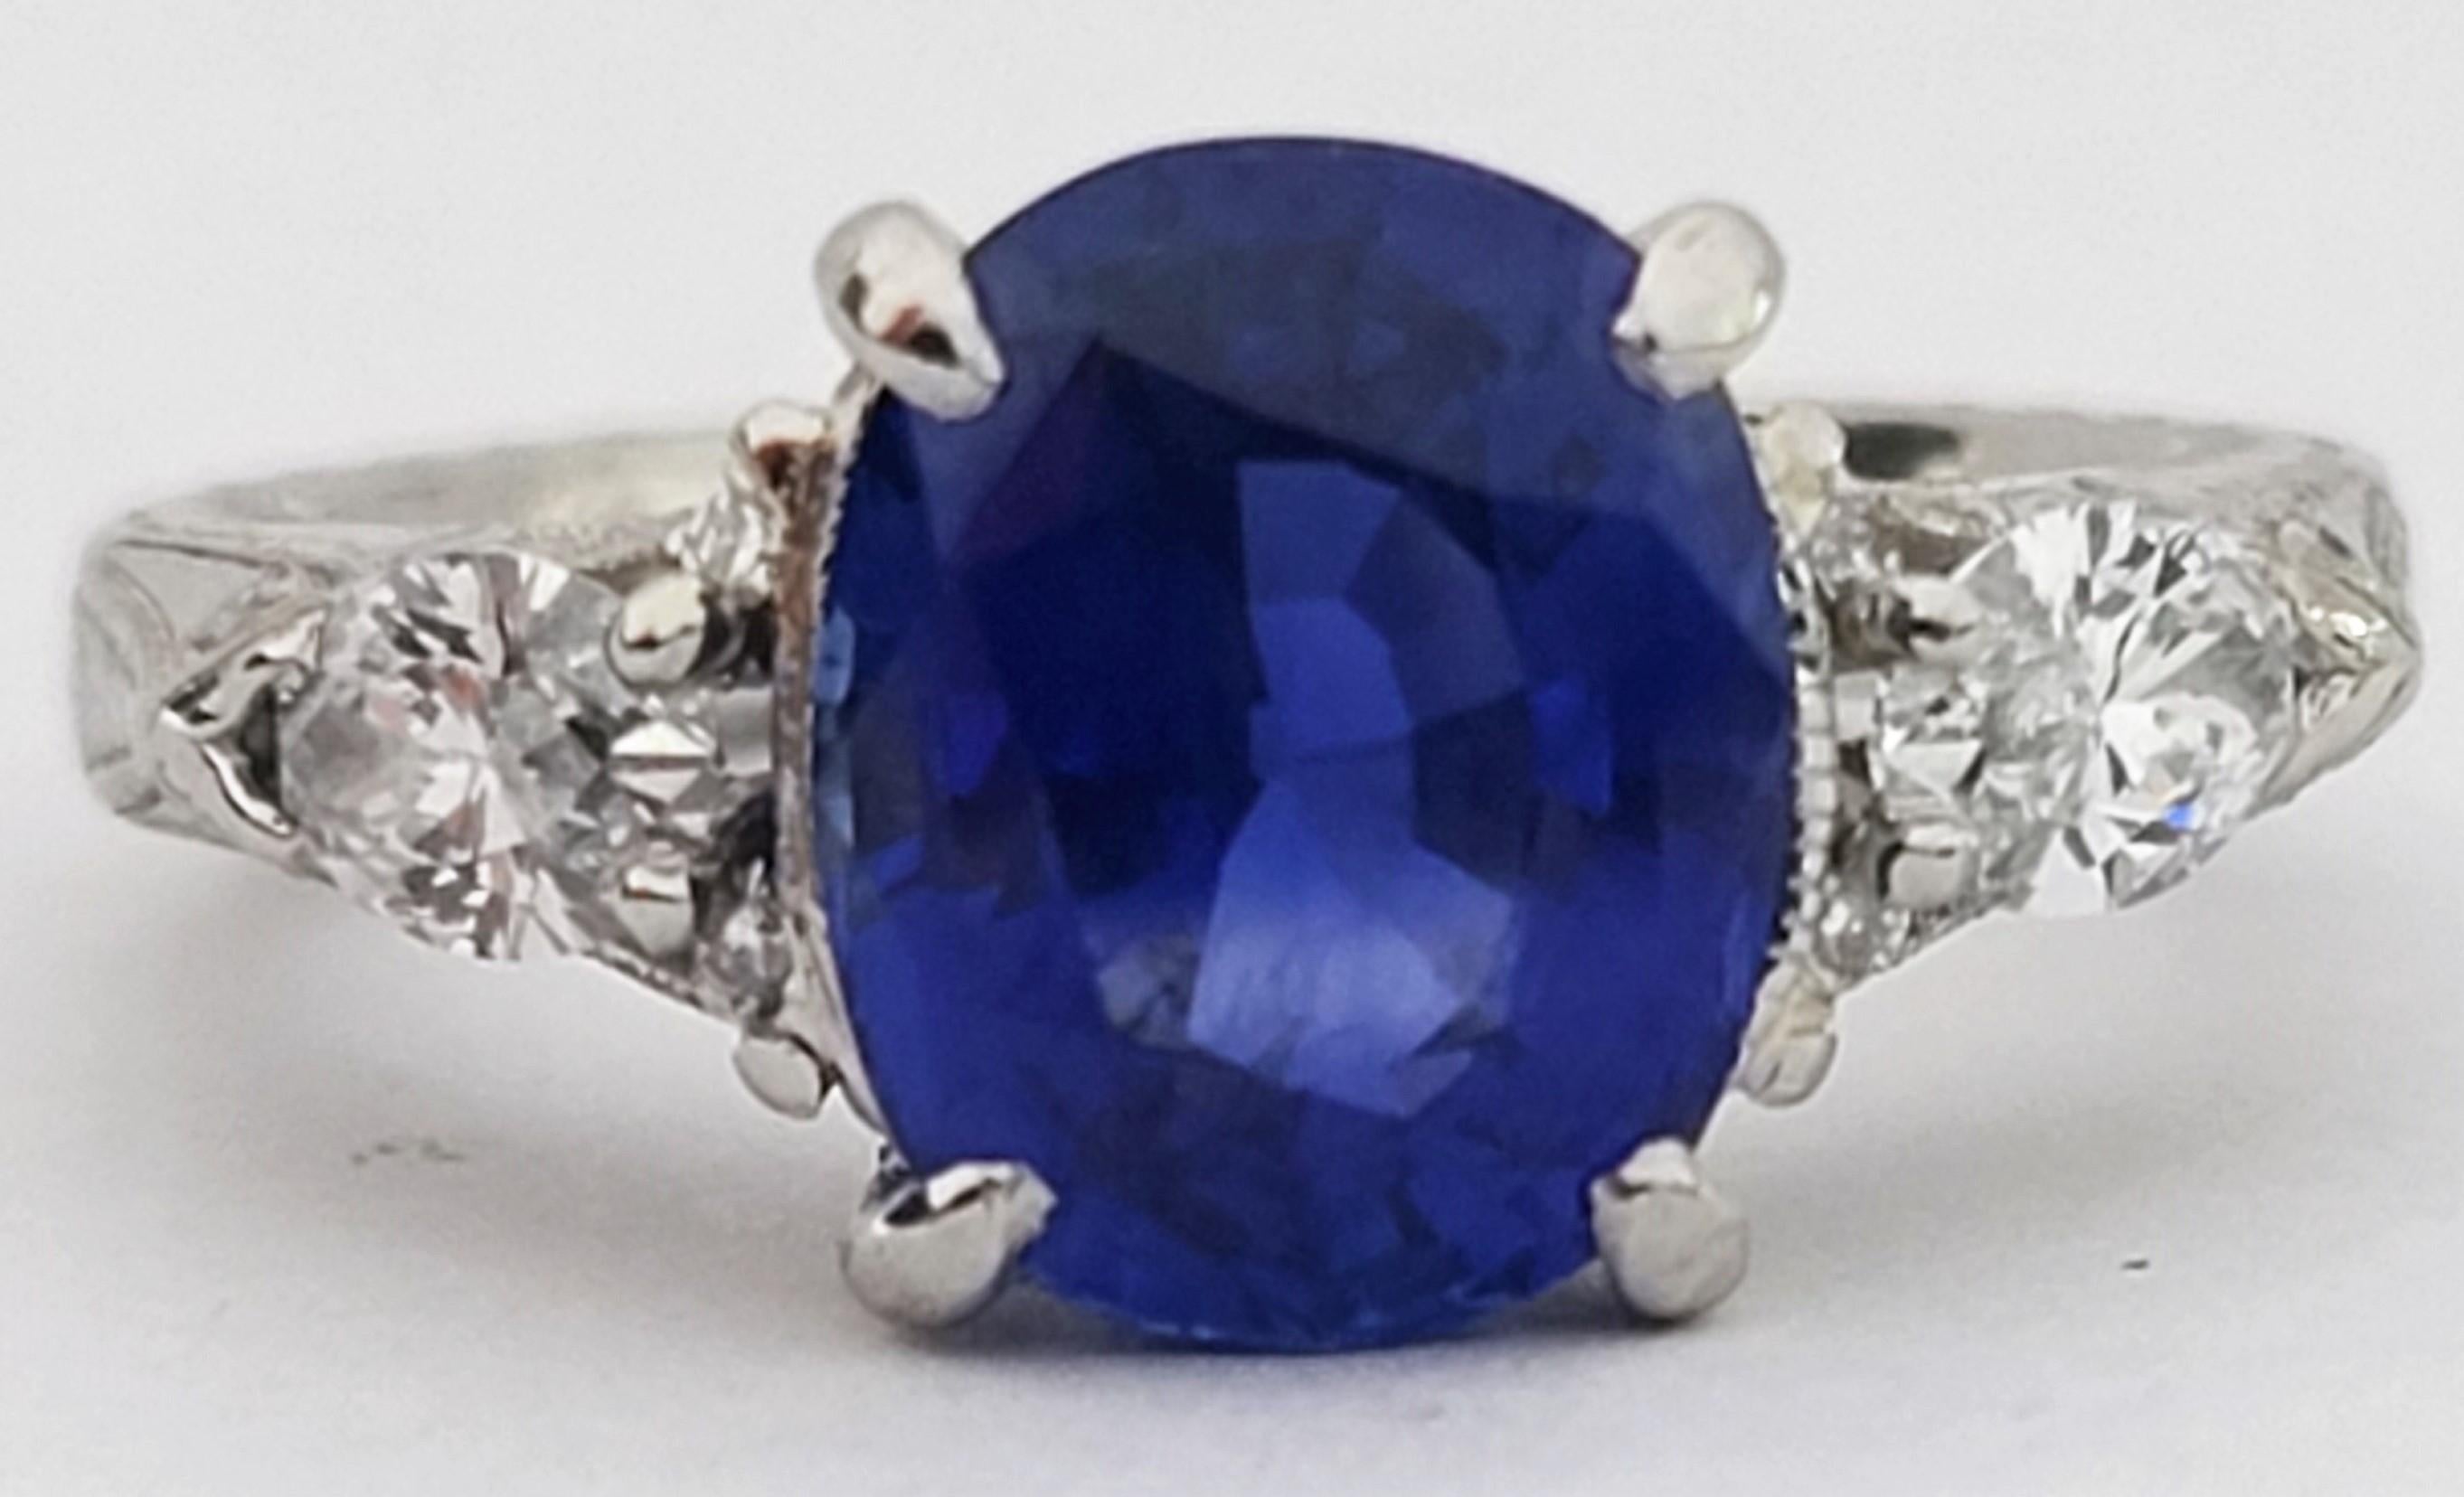 Stunning 3.91ct Natural Blue Sapphire 1.10ctw Diamond E-F VVS2-VS2 JBI Platinum Ring 10.8g Size 7.  Deep rich blue stunning natural sapphire with known weight of 3.91 carats, accented by two large nearly half carat each marquise diamonds that are